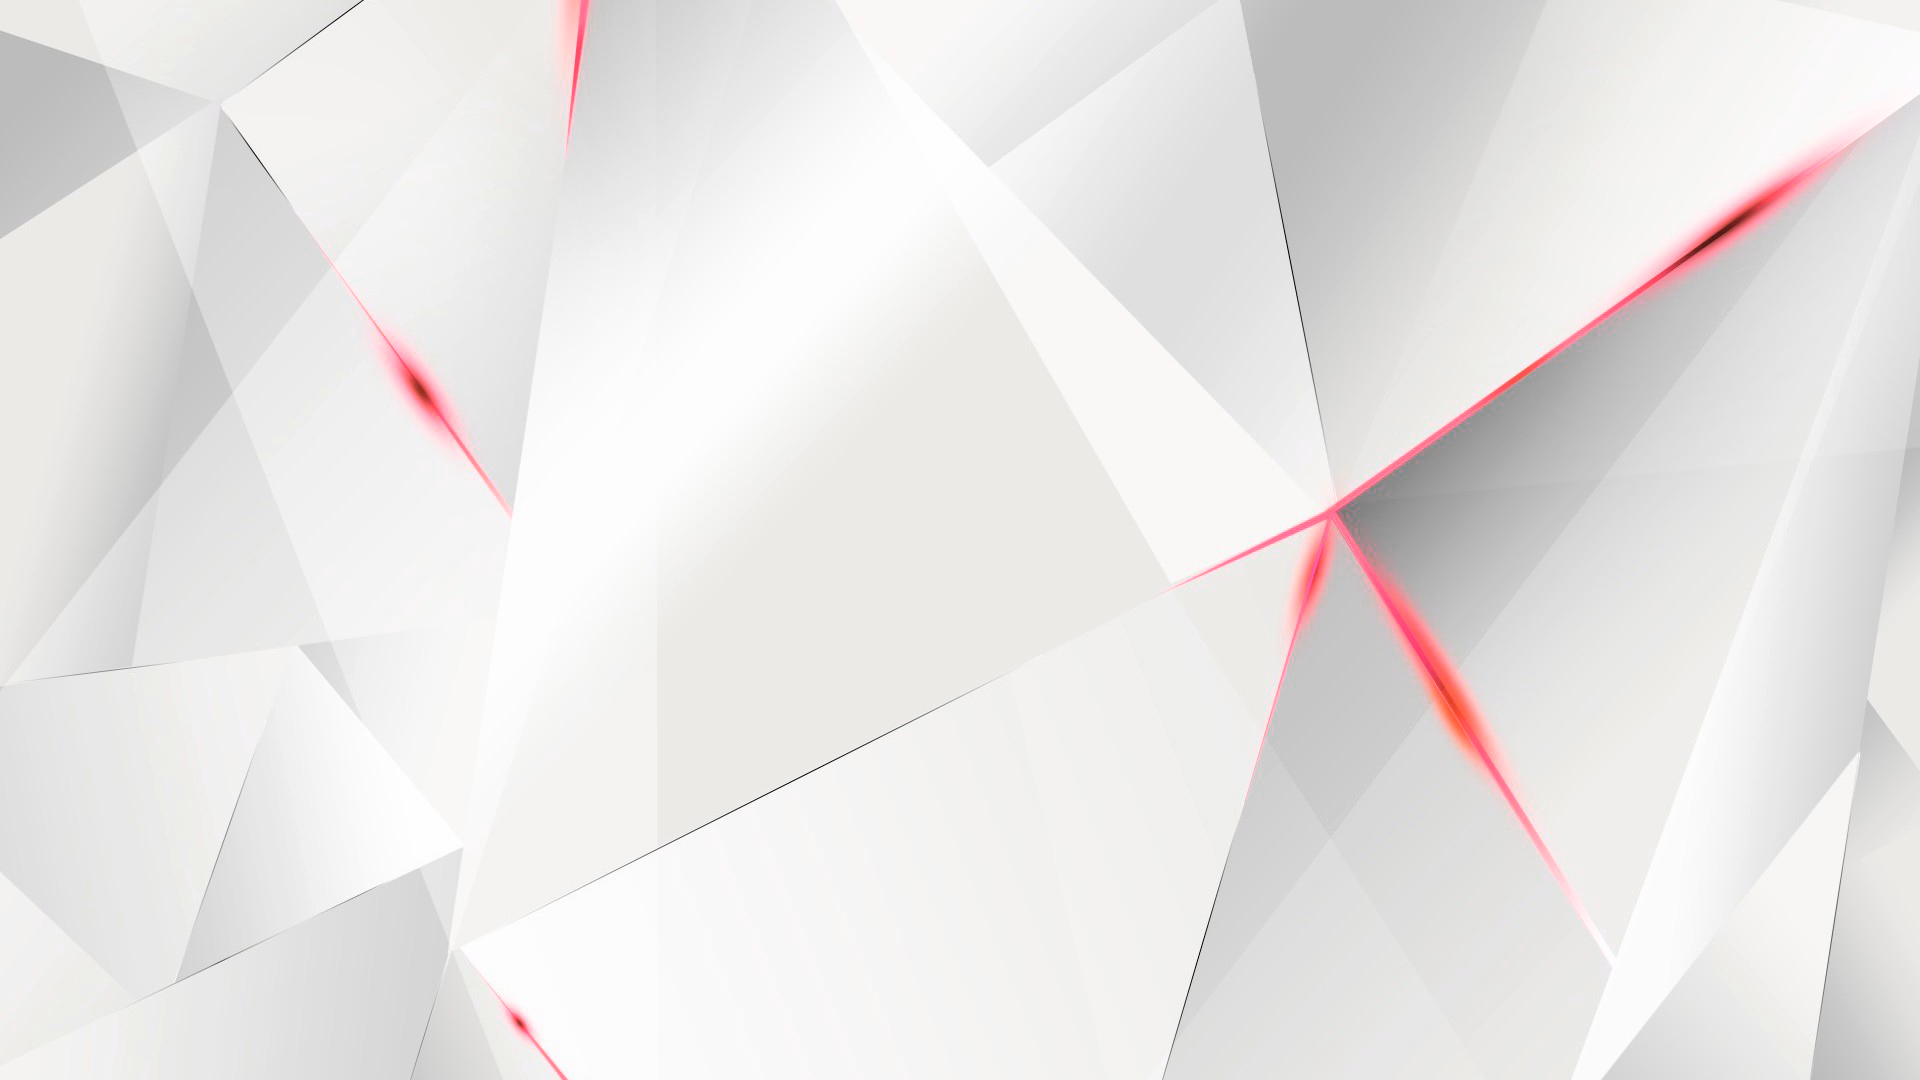 White Abstract Wallpaper Picture On Wallpaper 1080p White And Red Background Hd 19x1080 Wallpaper Teahub Io